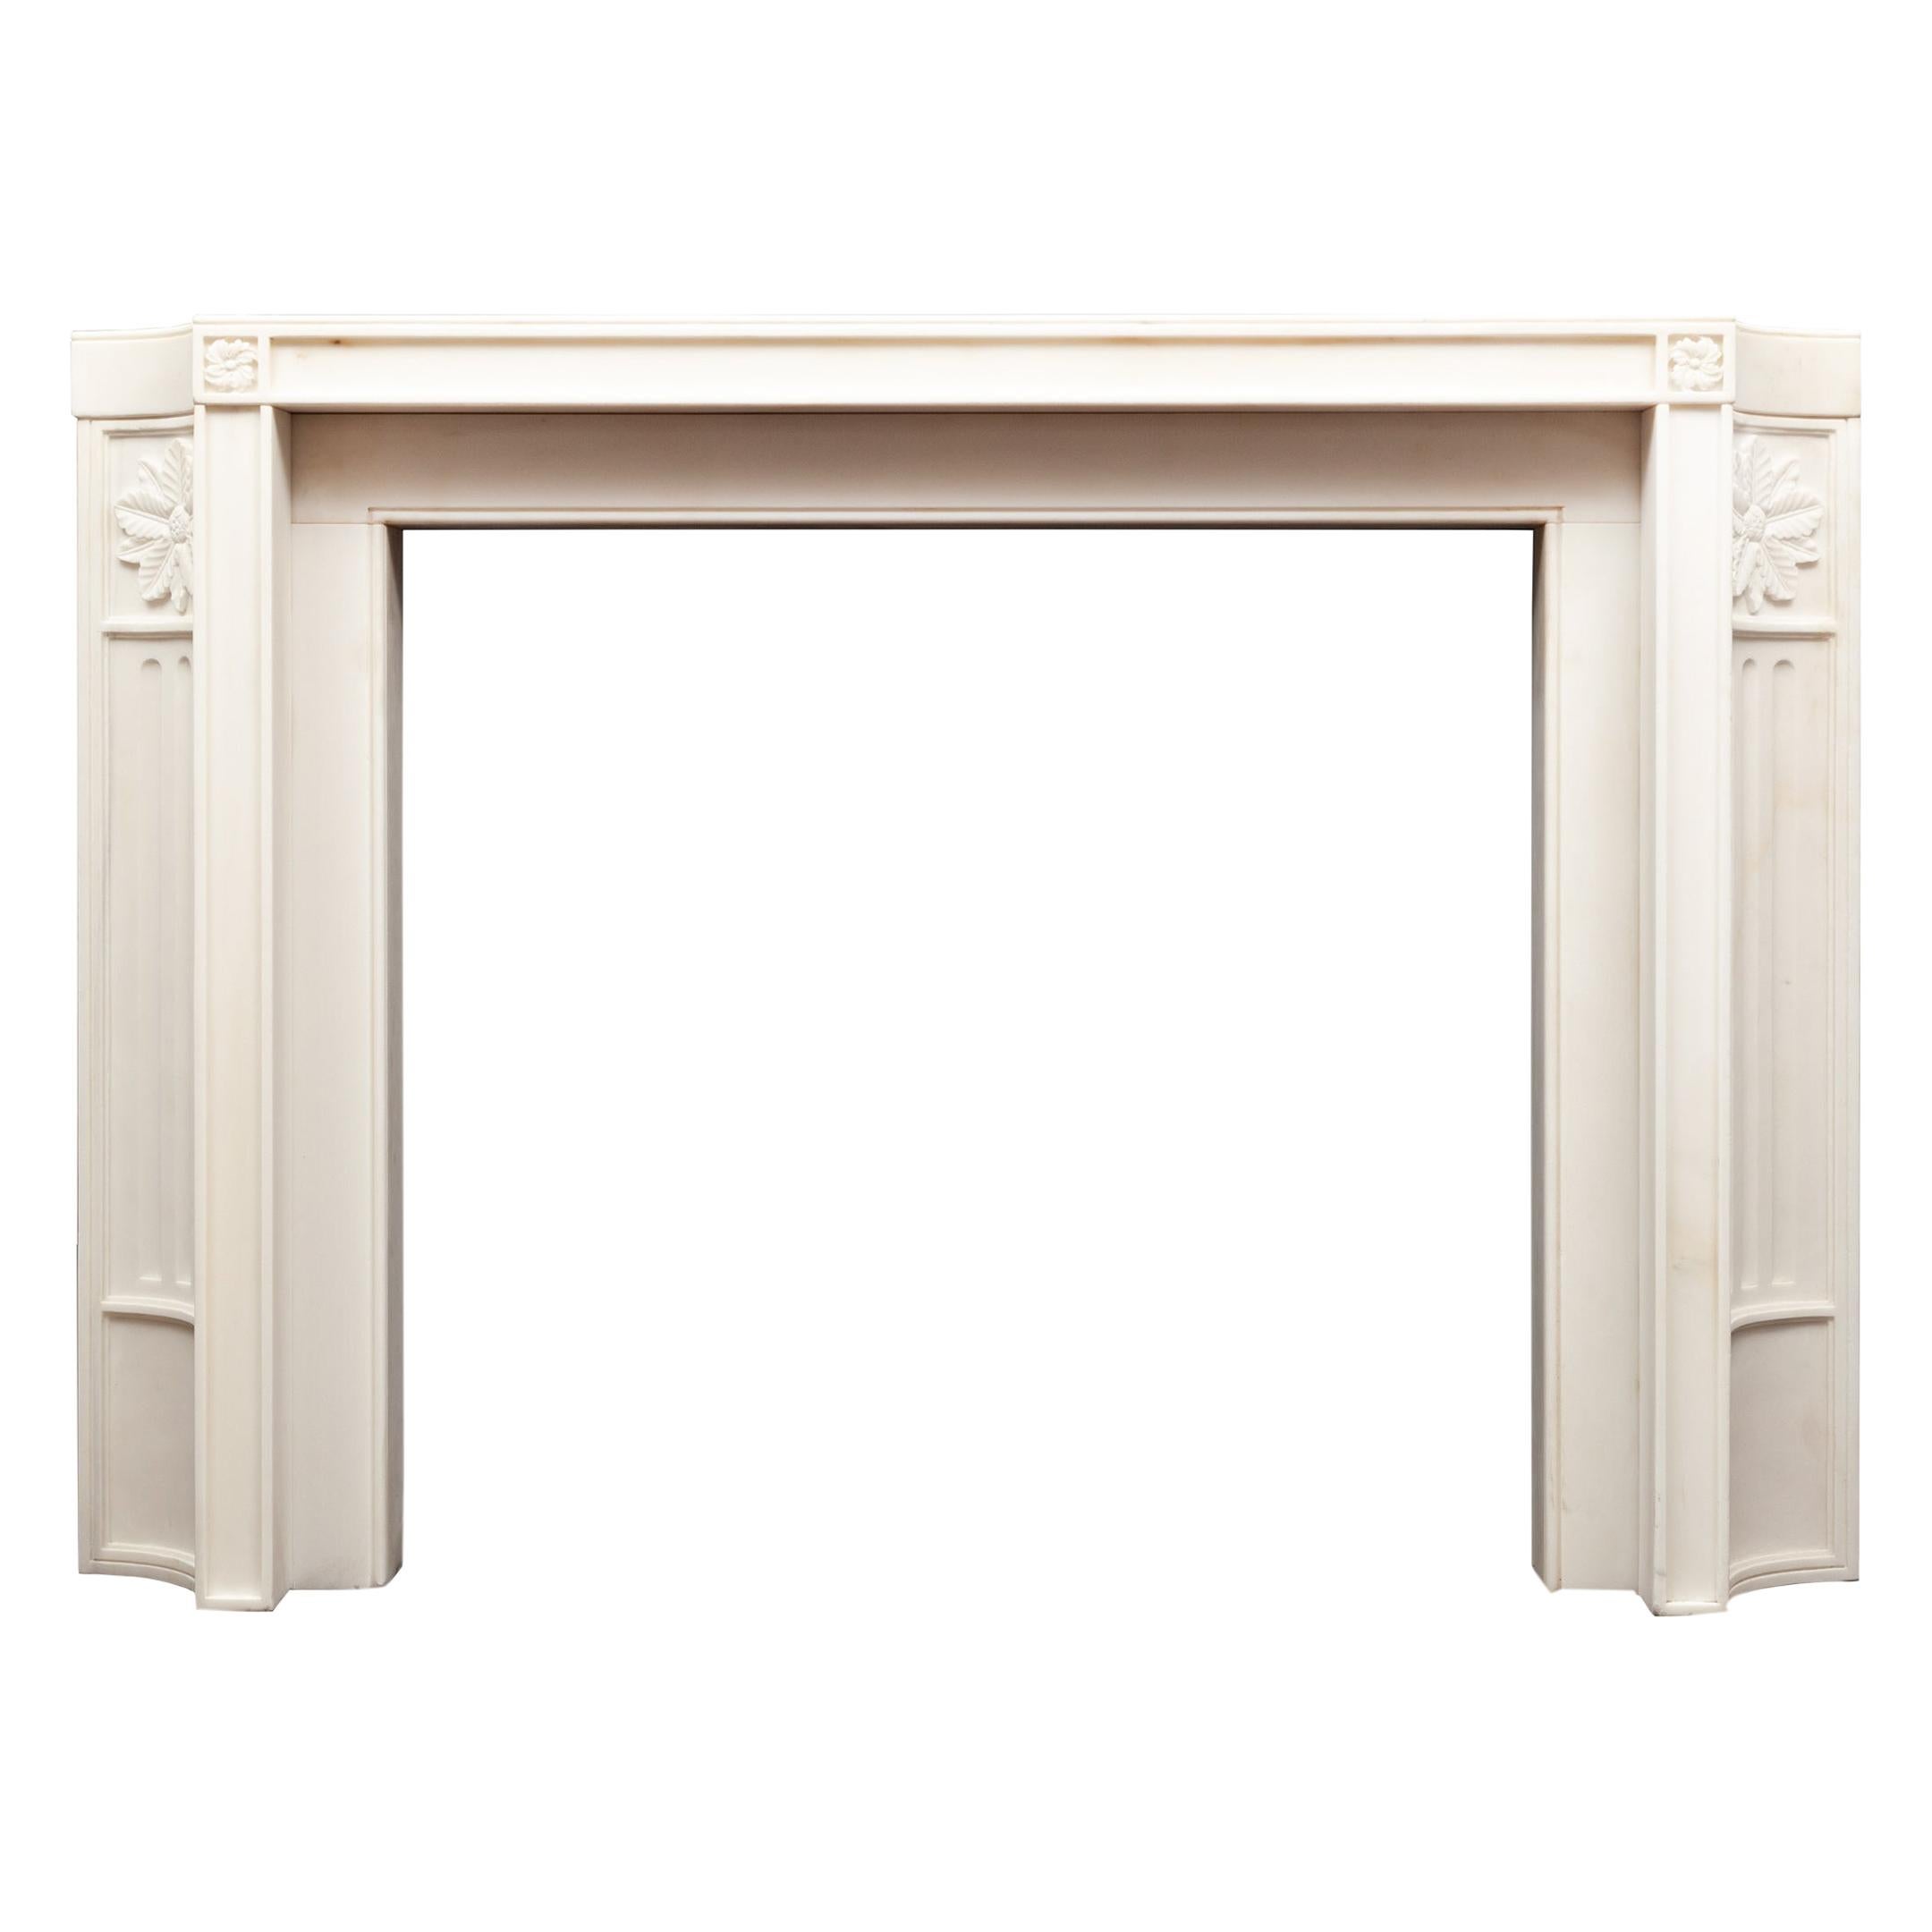 Stylish White Statuary Marble Fireplace of Early 20th Century Form